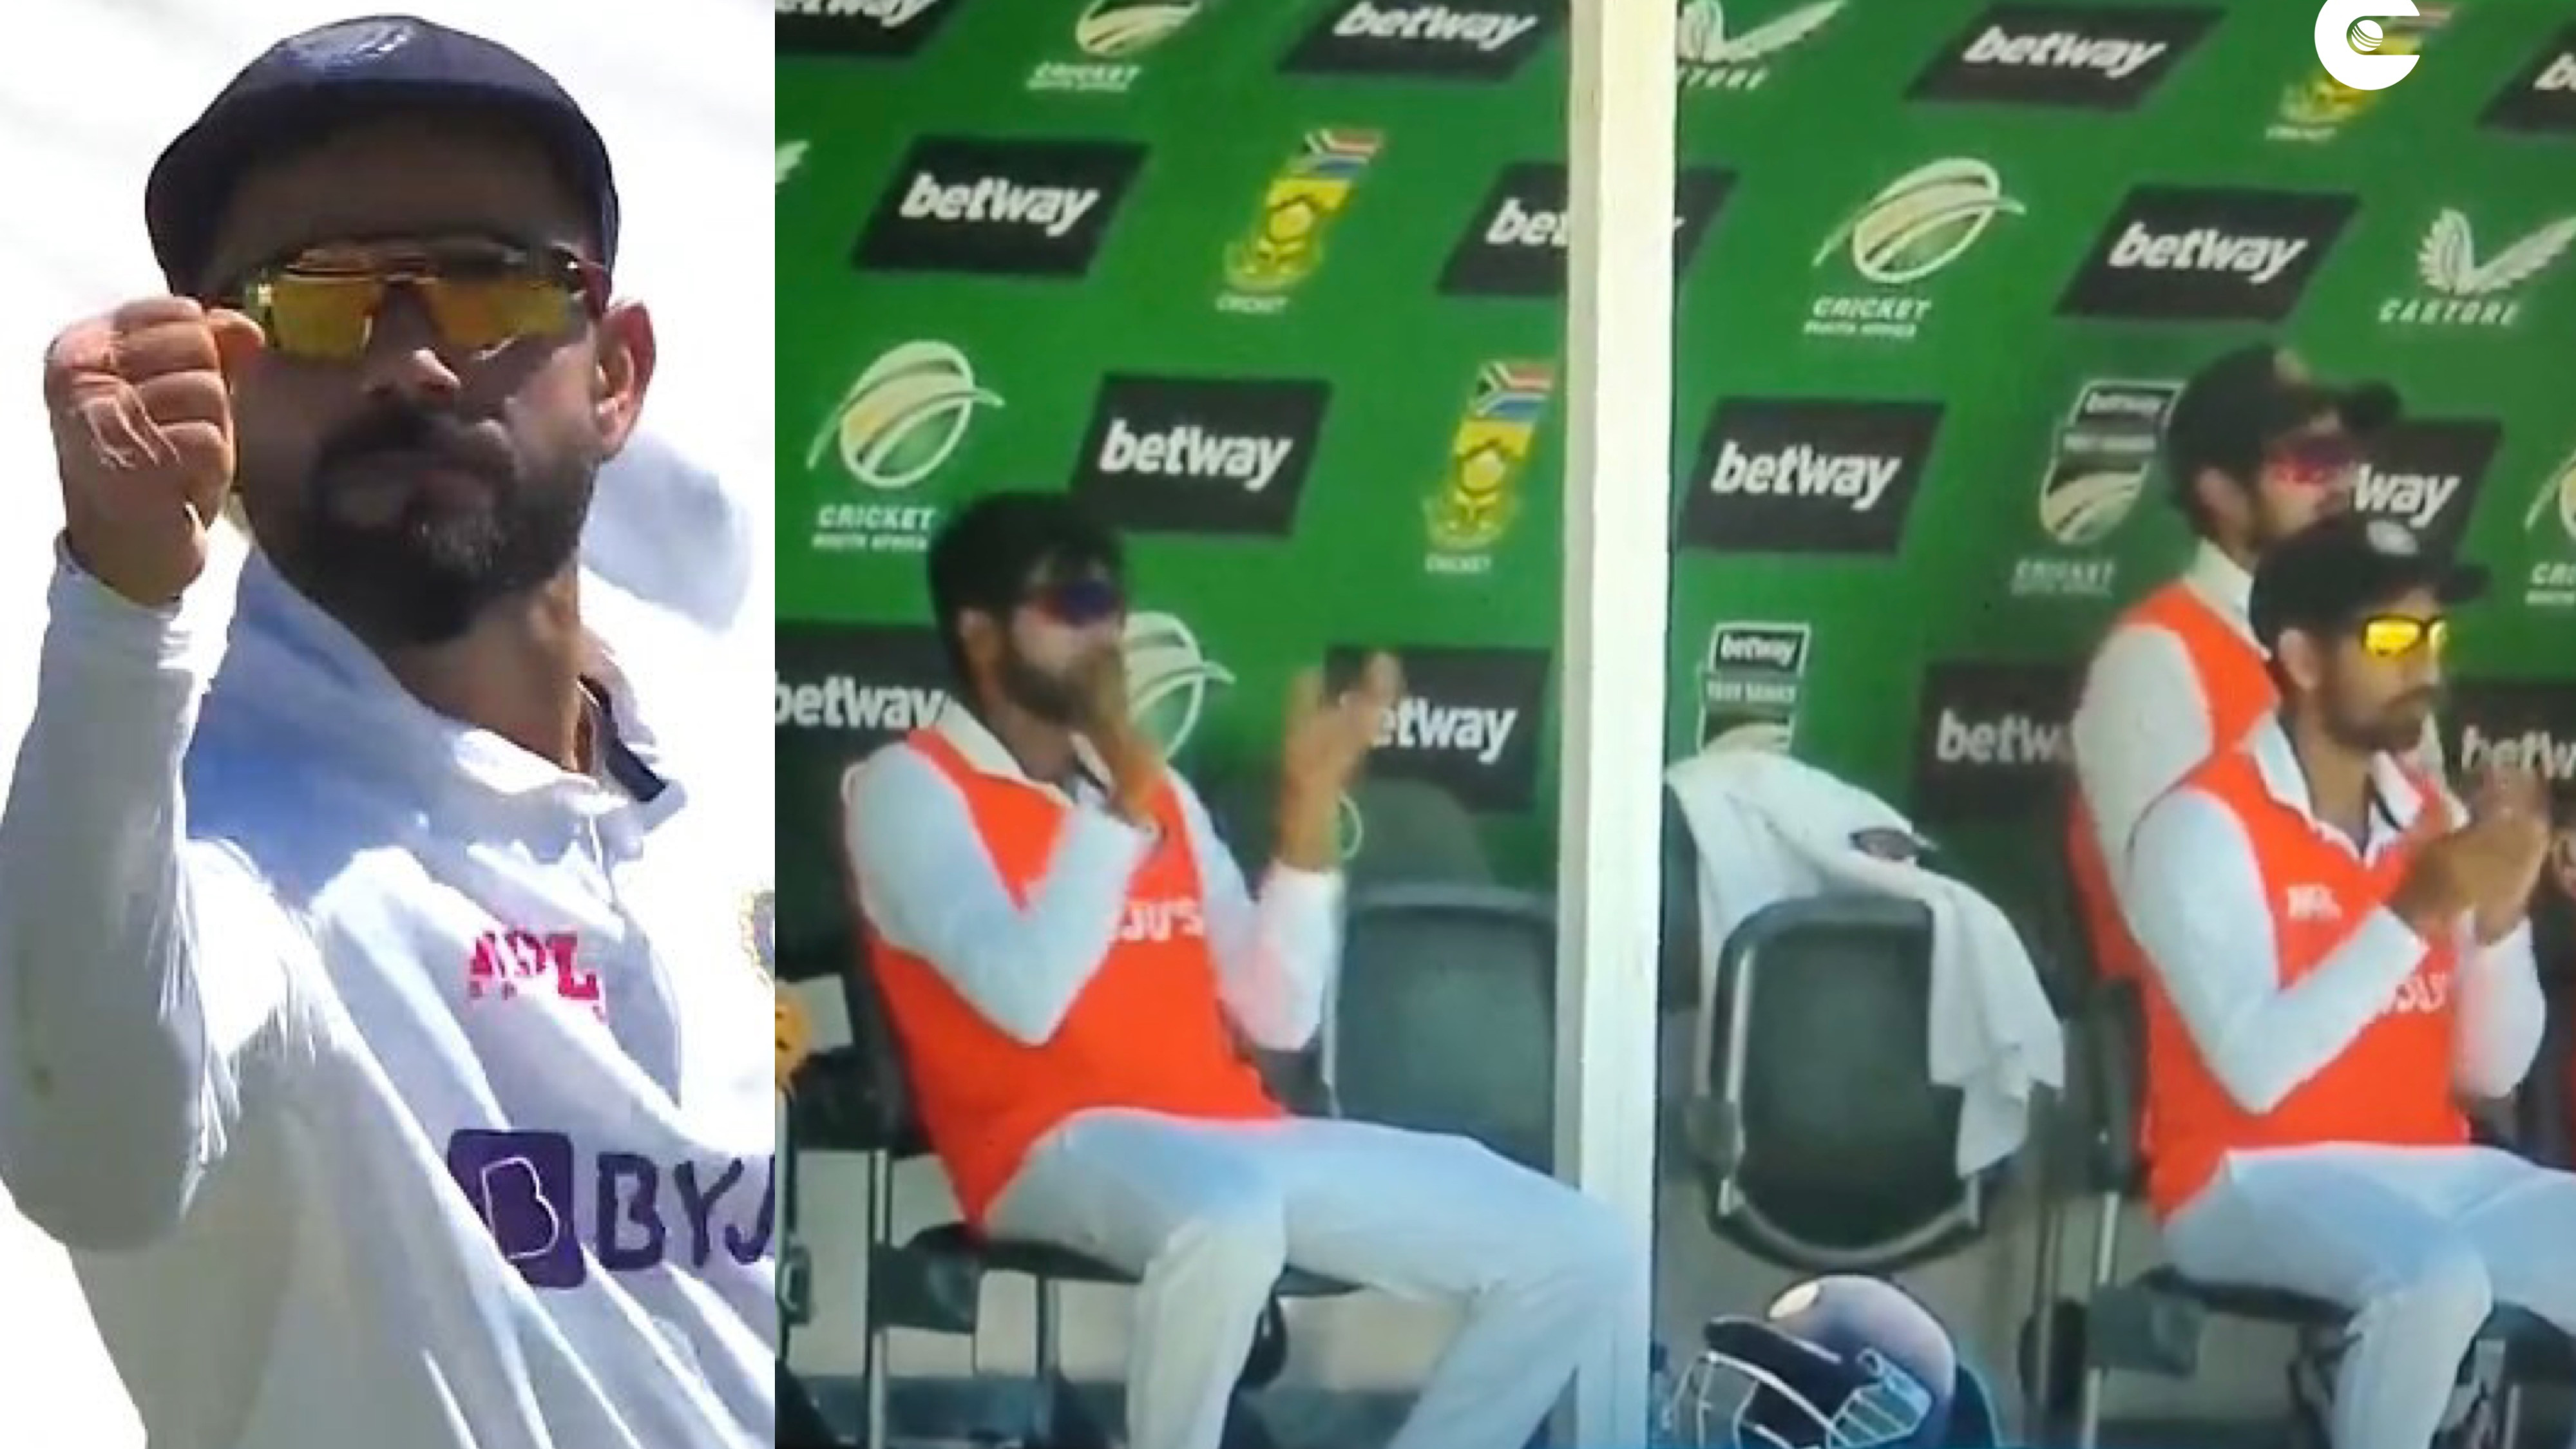 SA v IND 2021-22: WATCH - 'Keep clapping boys' Virat Kohli asks dugout to clap loudly to support the team